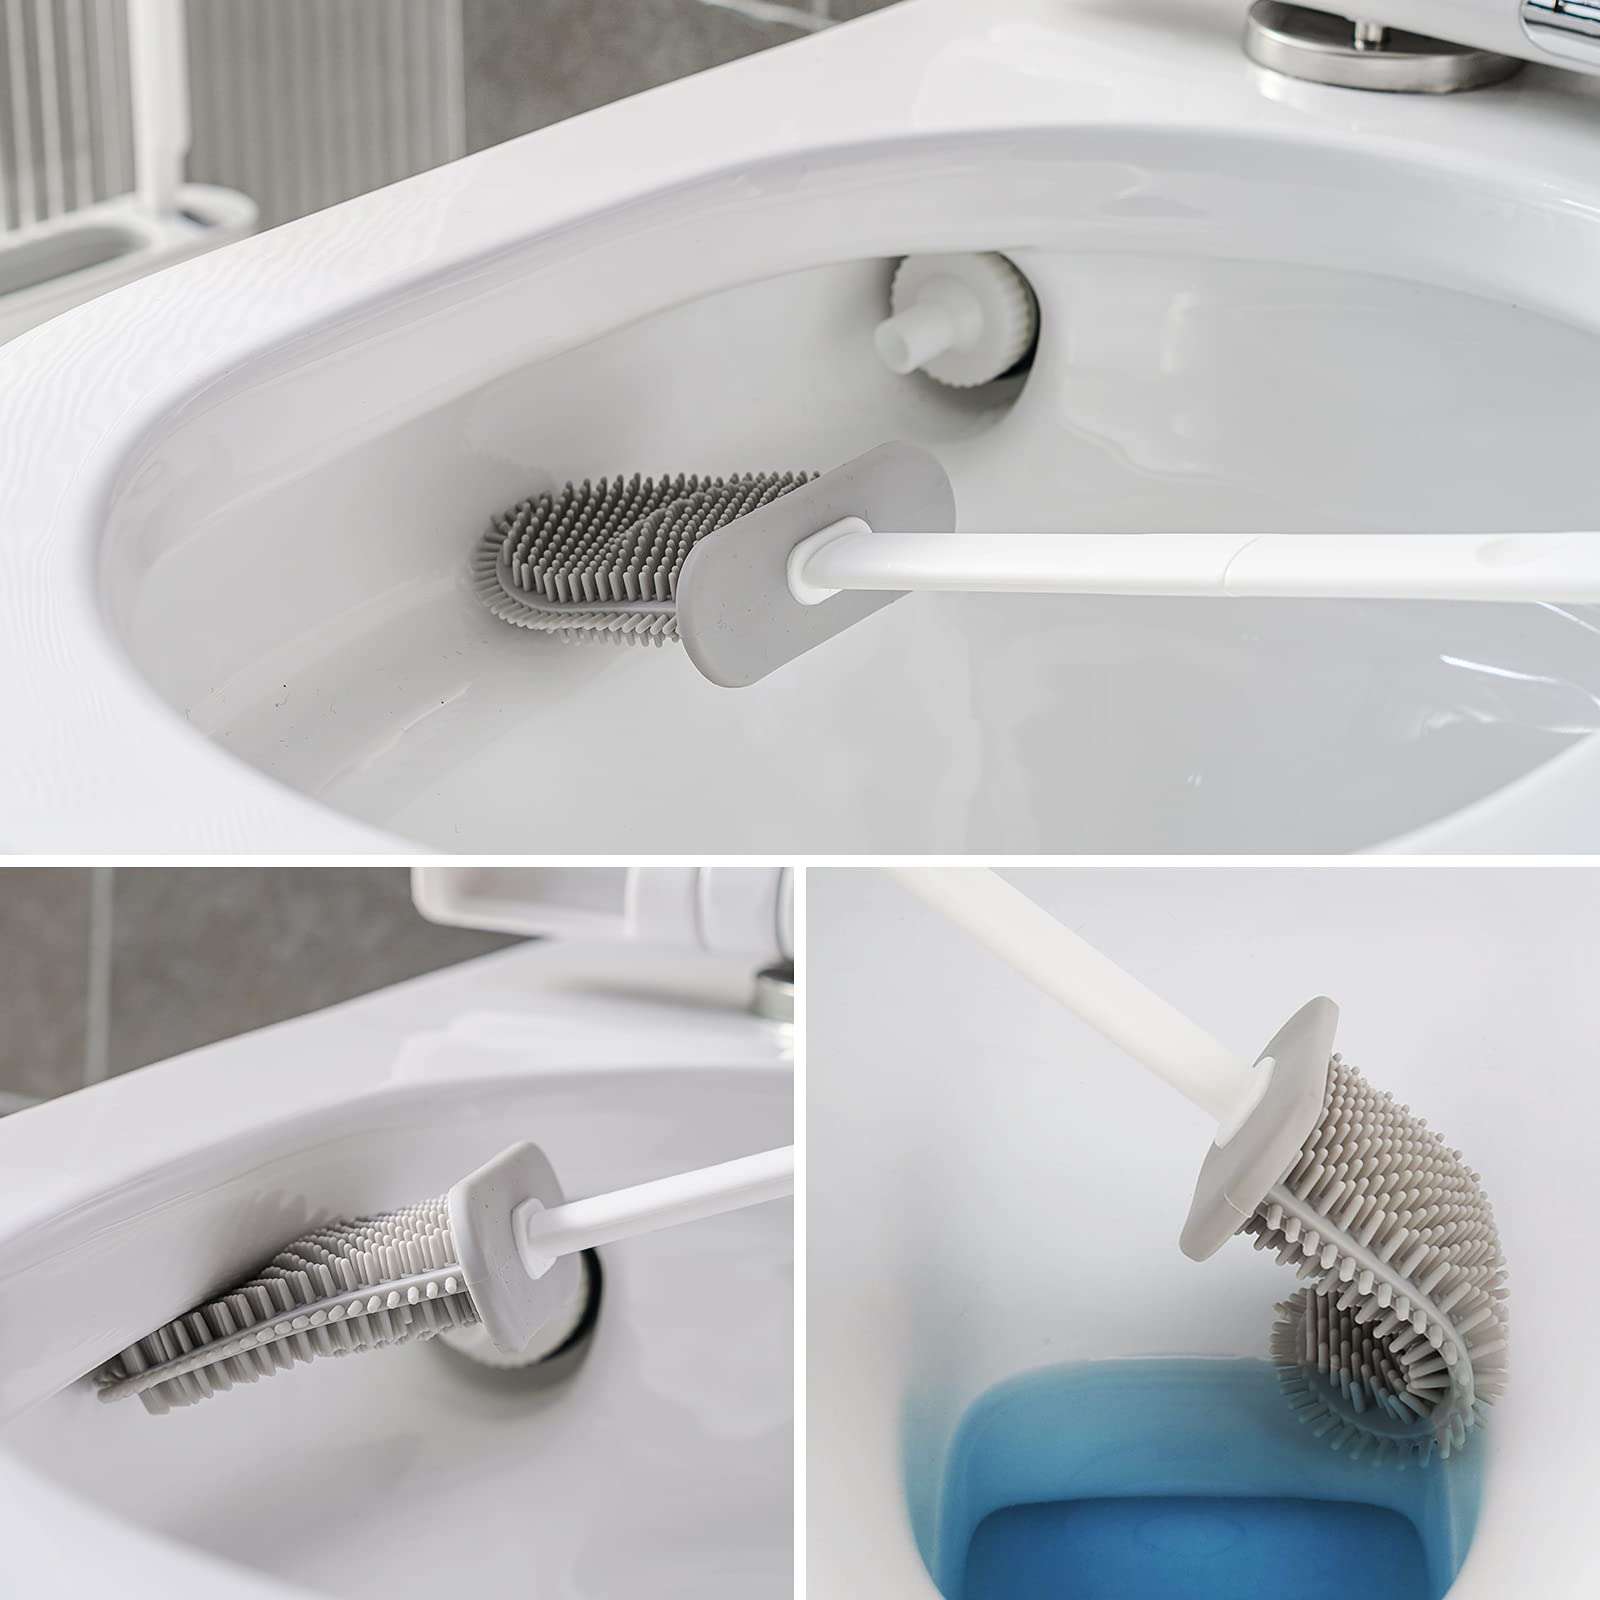 Cleaning a Toilet Brush and Holder